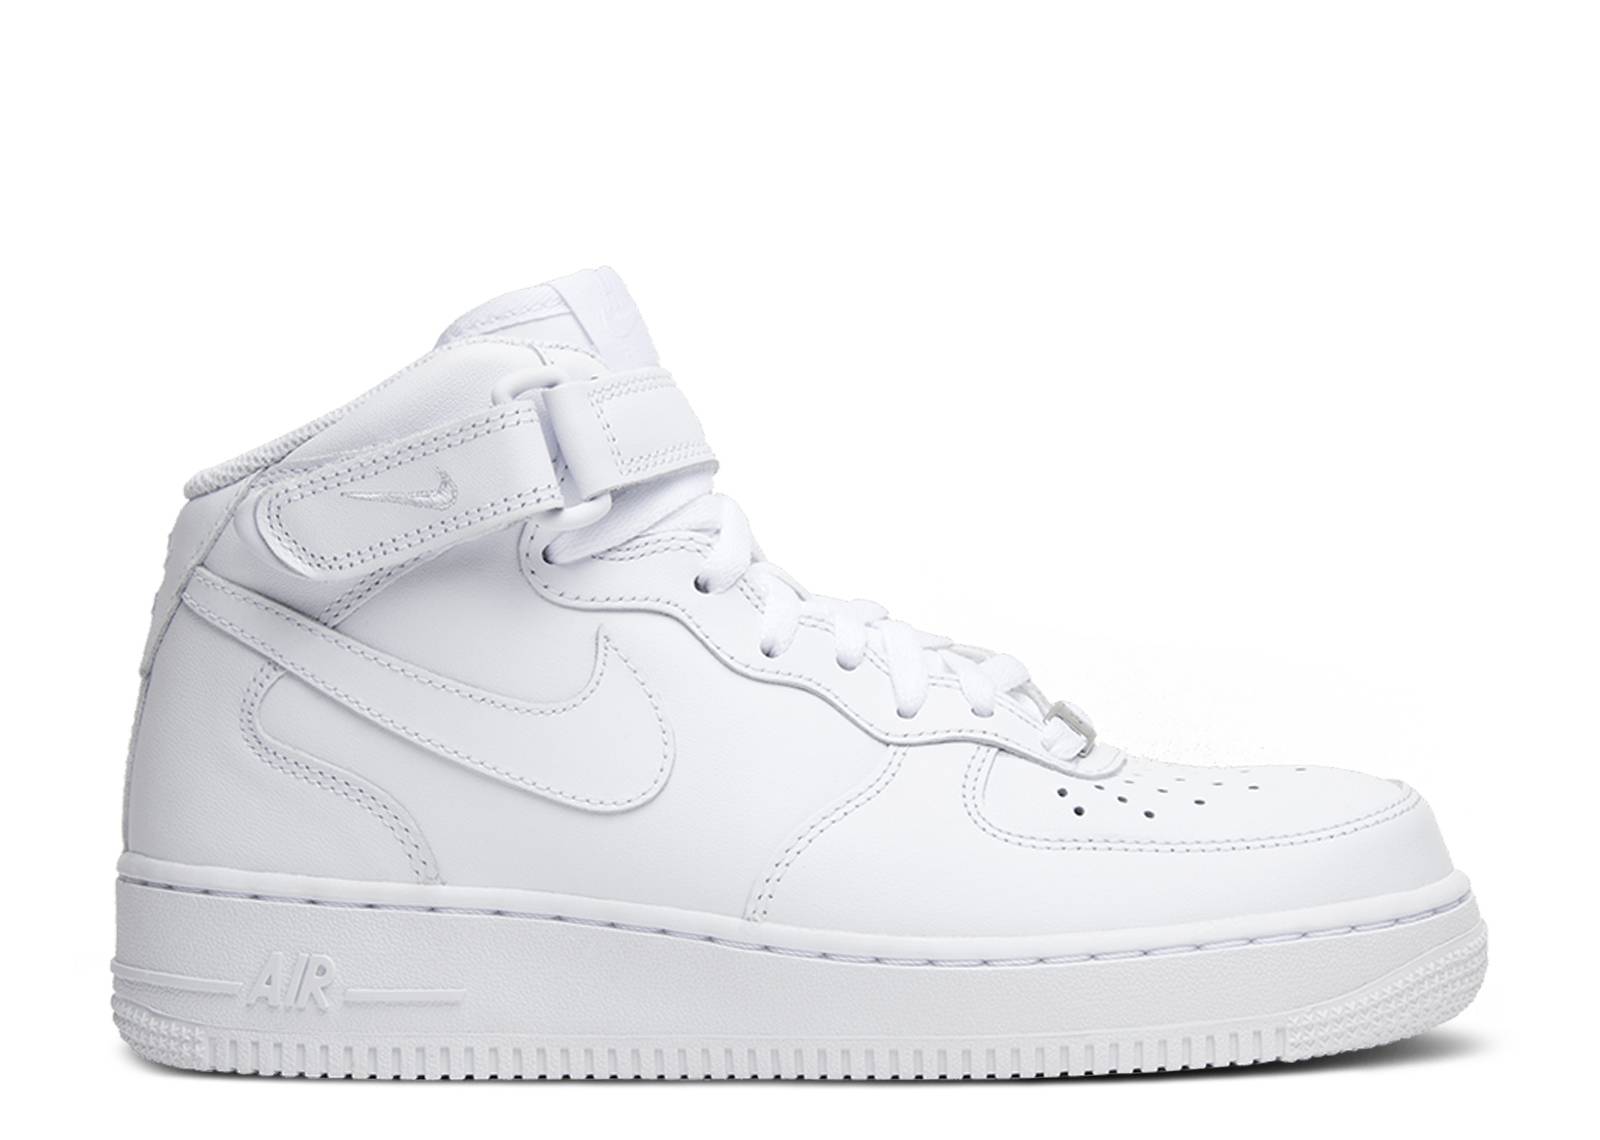 Wmns Air Force 1 Mid 07 Leather 'Triple White'